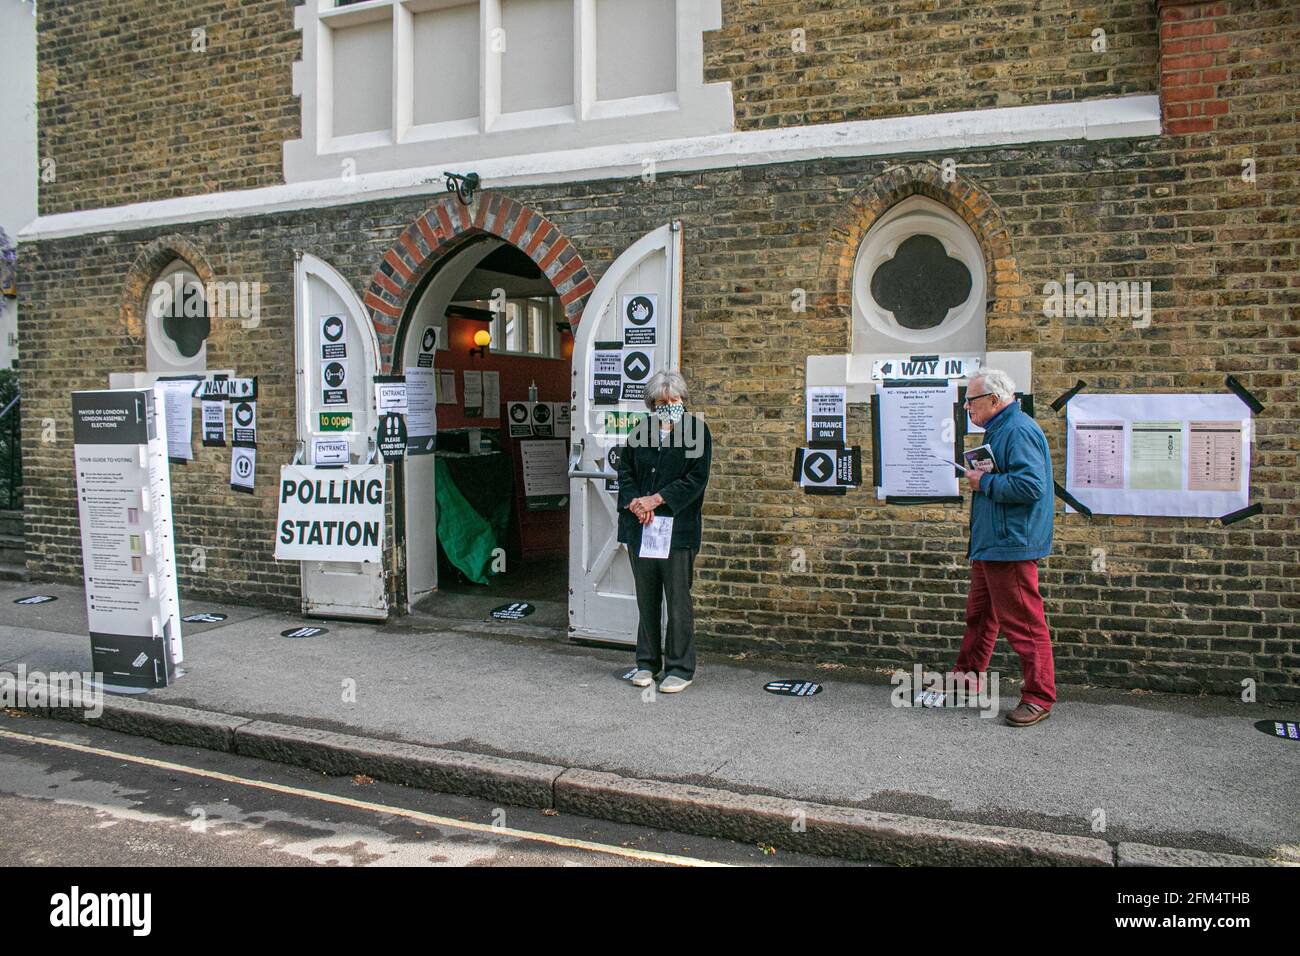 WIMBLEDON LONDON 6 May 2021. People social distancing as they wait outside a polling station in Wimbledon in the morning to vote as millions of voters go to the polls on what is known as Super Thursday for the first time in two years  across the country for the London Mayor and to elect  Scottish and Welsh Parliaments, as well as Regional Mayor and  councillors. The local elections were postponed last year due to the coronavirus pandemic. Credit amer ghazzal/Alamy Live News Stock Photo